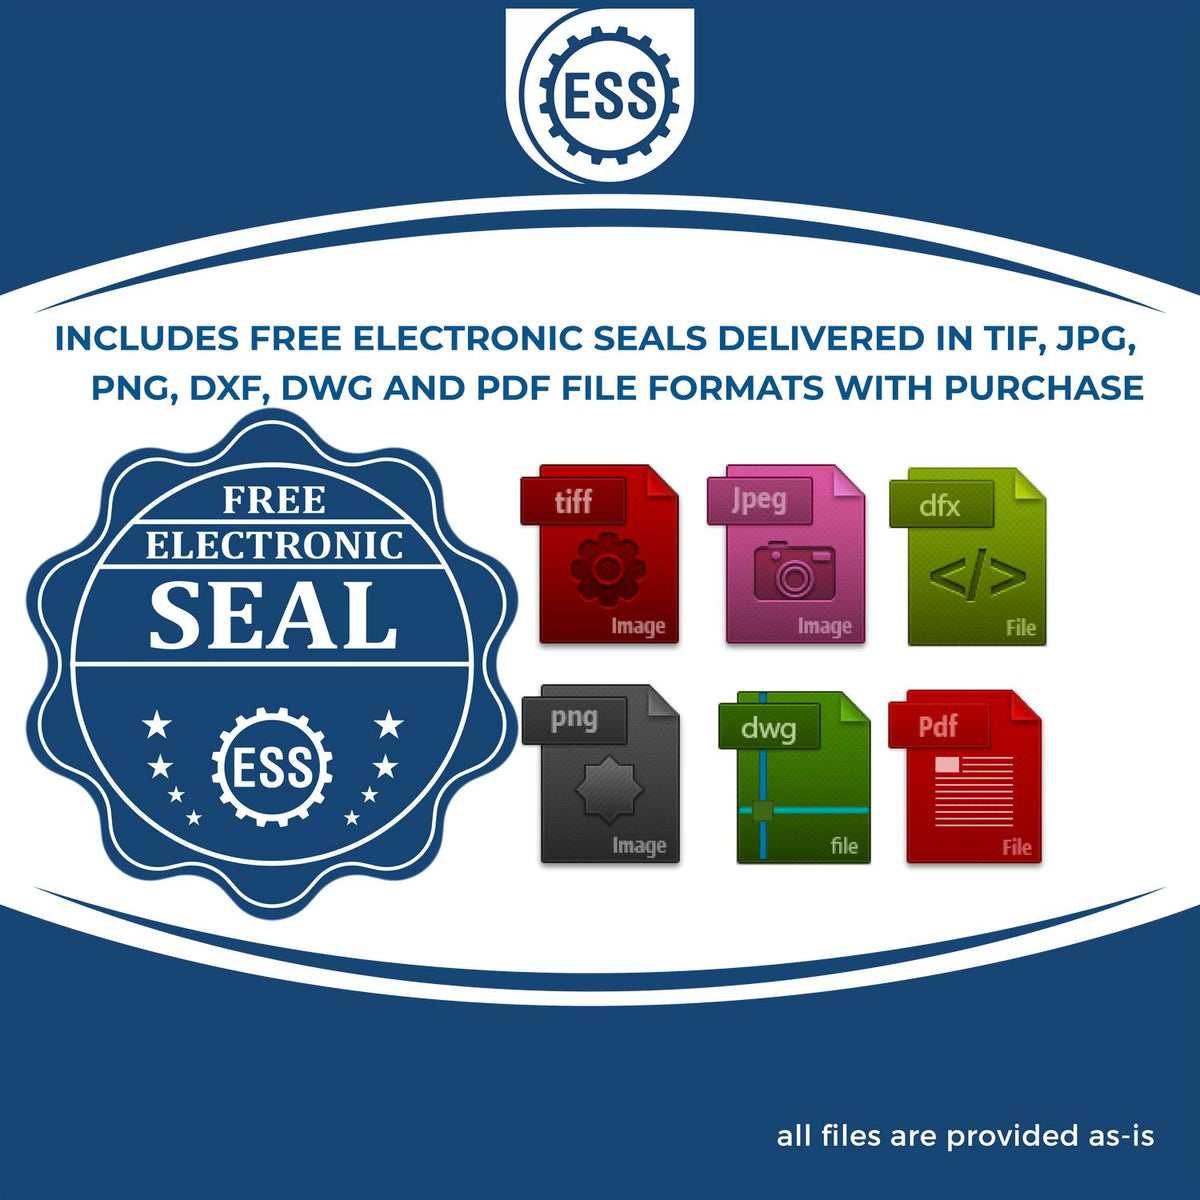 An infographic for the free electronic seal for the Hybrid New Jersey Architect Seal illustrating the different file type icons such as DXF, DWG, TIF, JPG and PNG.